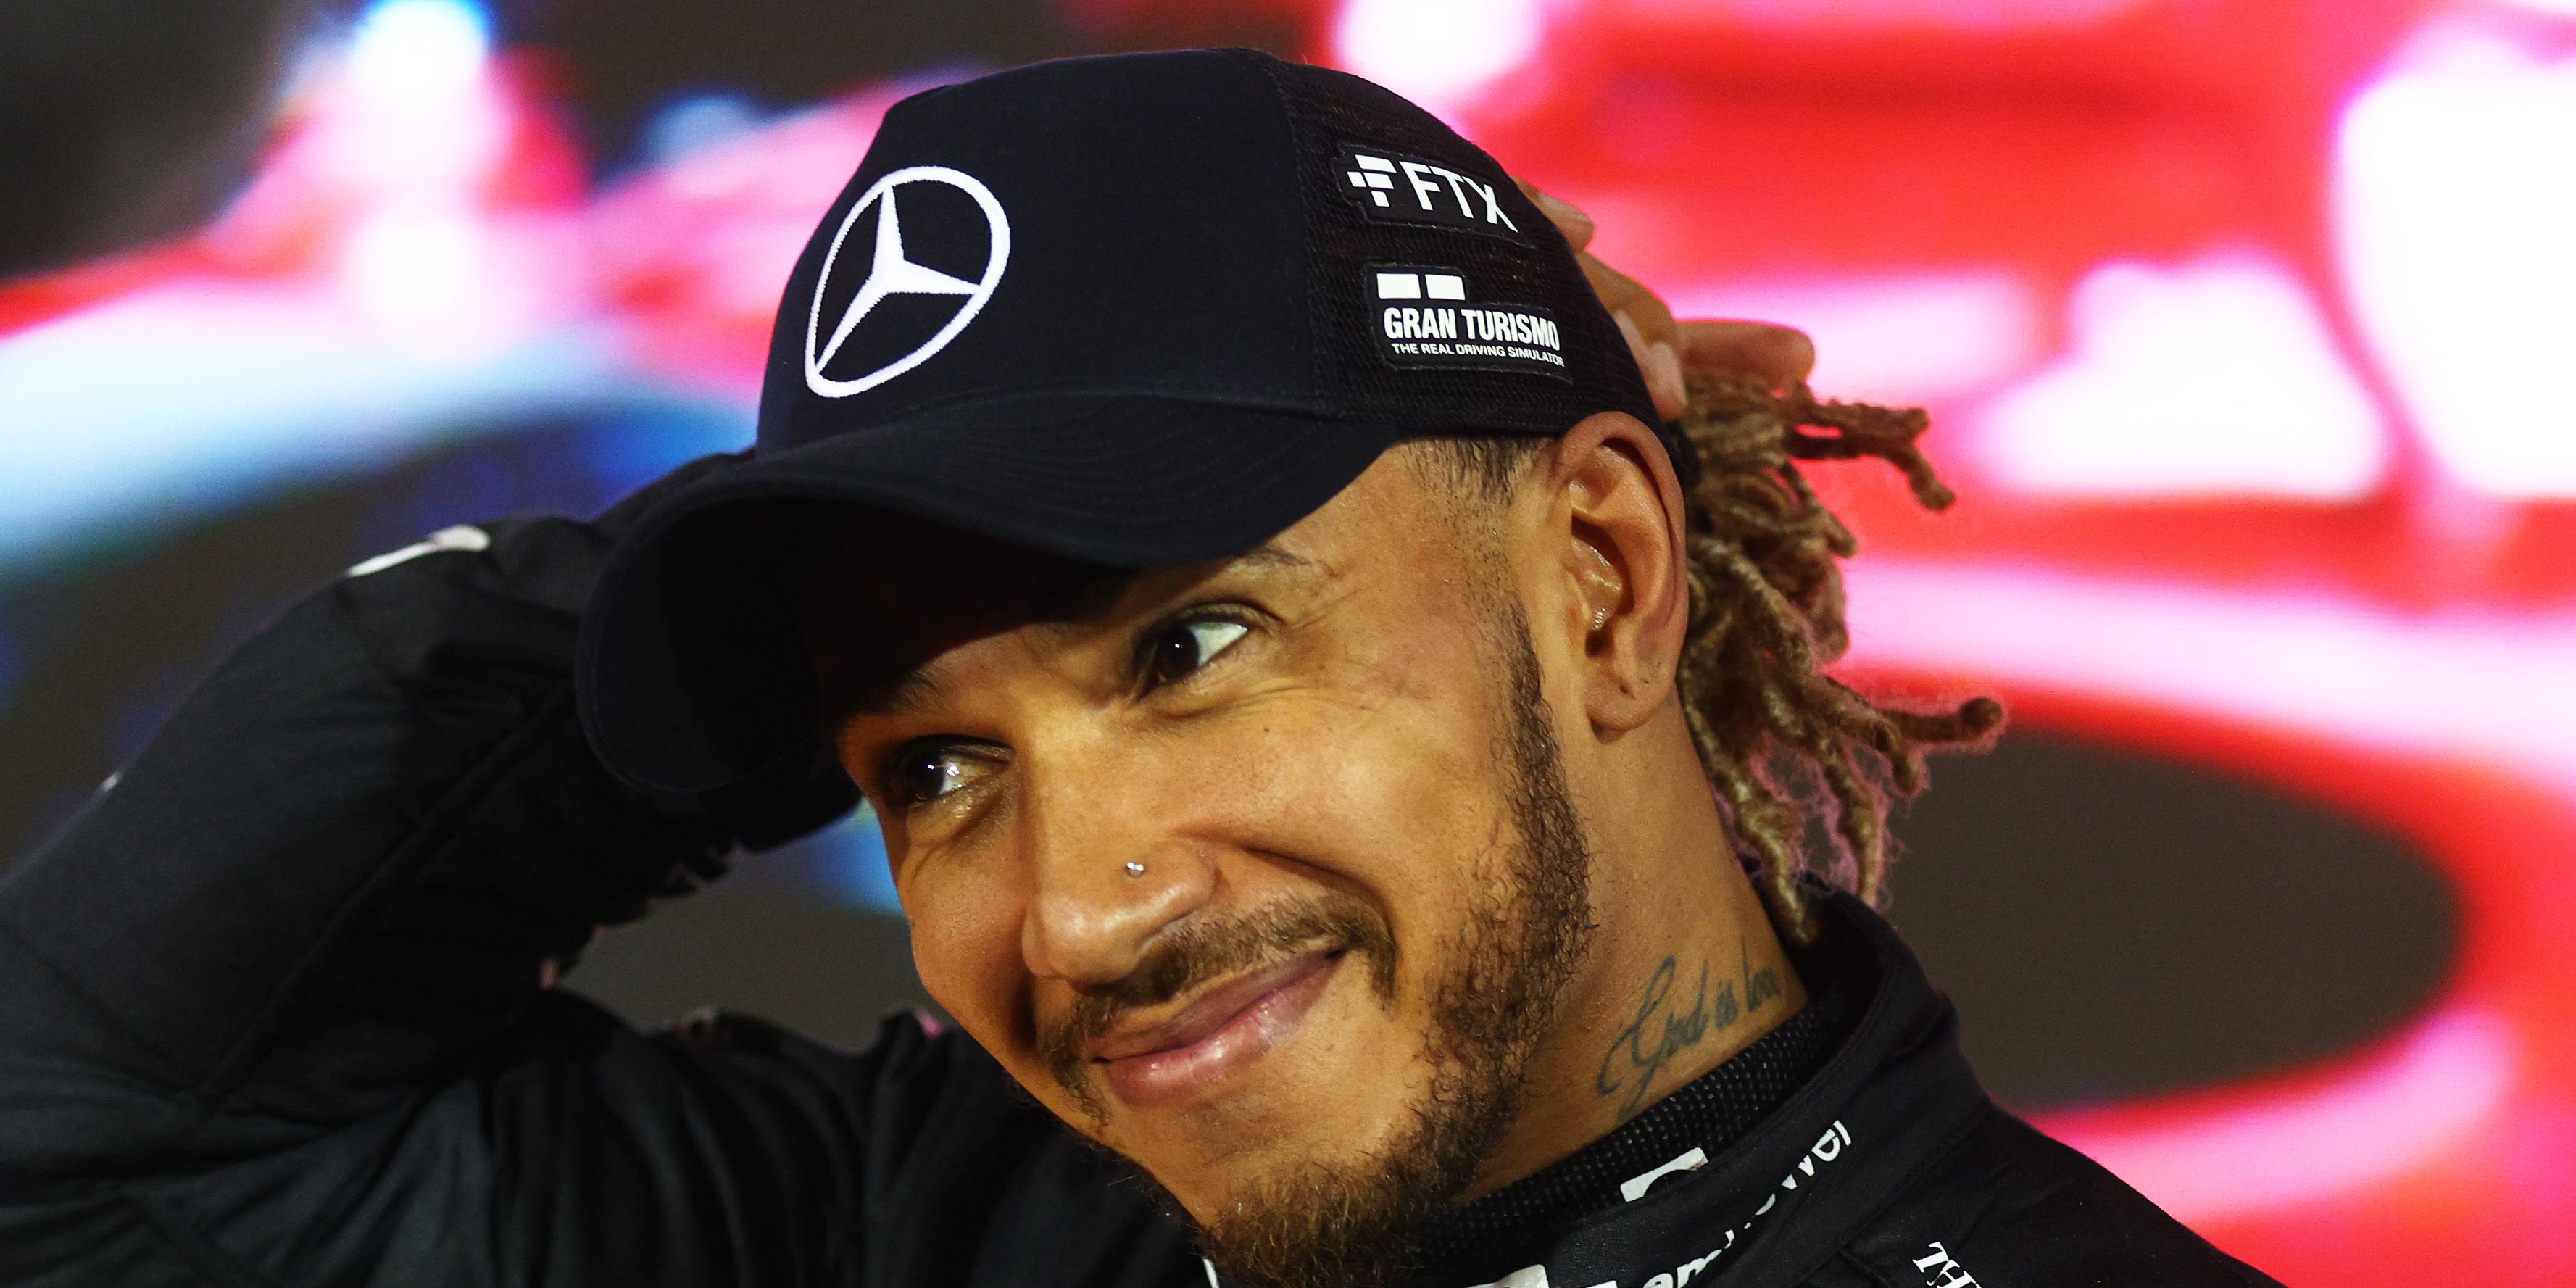 Read the Full Report Here: No Apologies to Hamilton for F1 Abu Dhabi GP Debacle